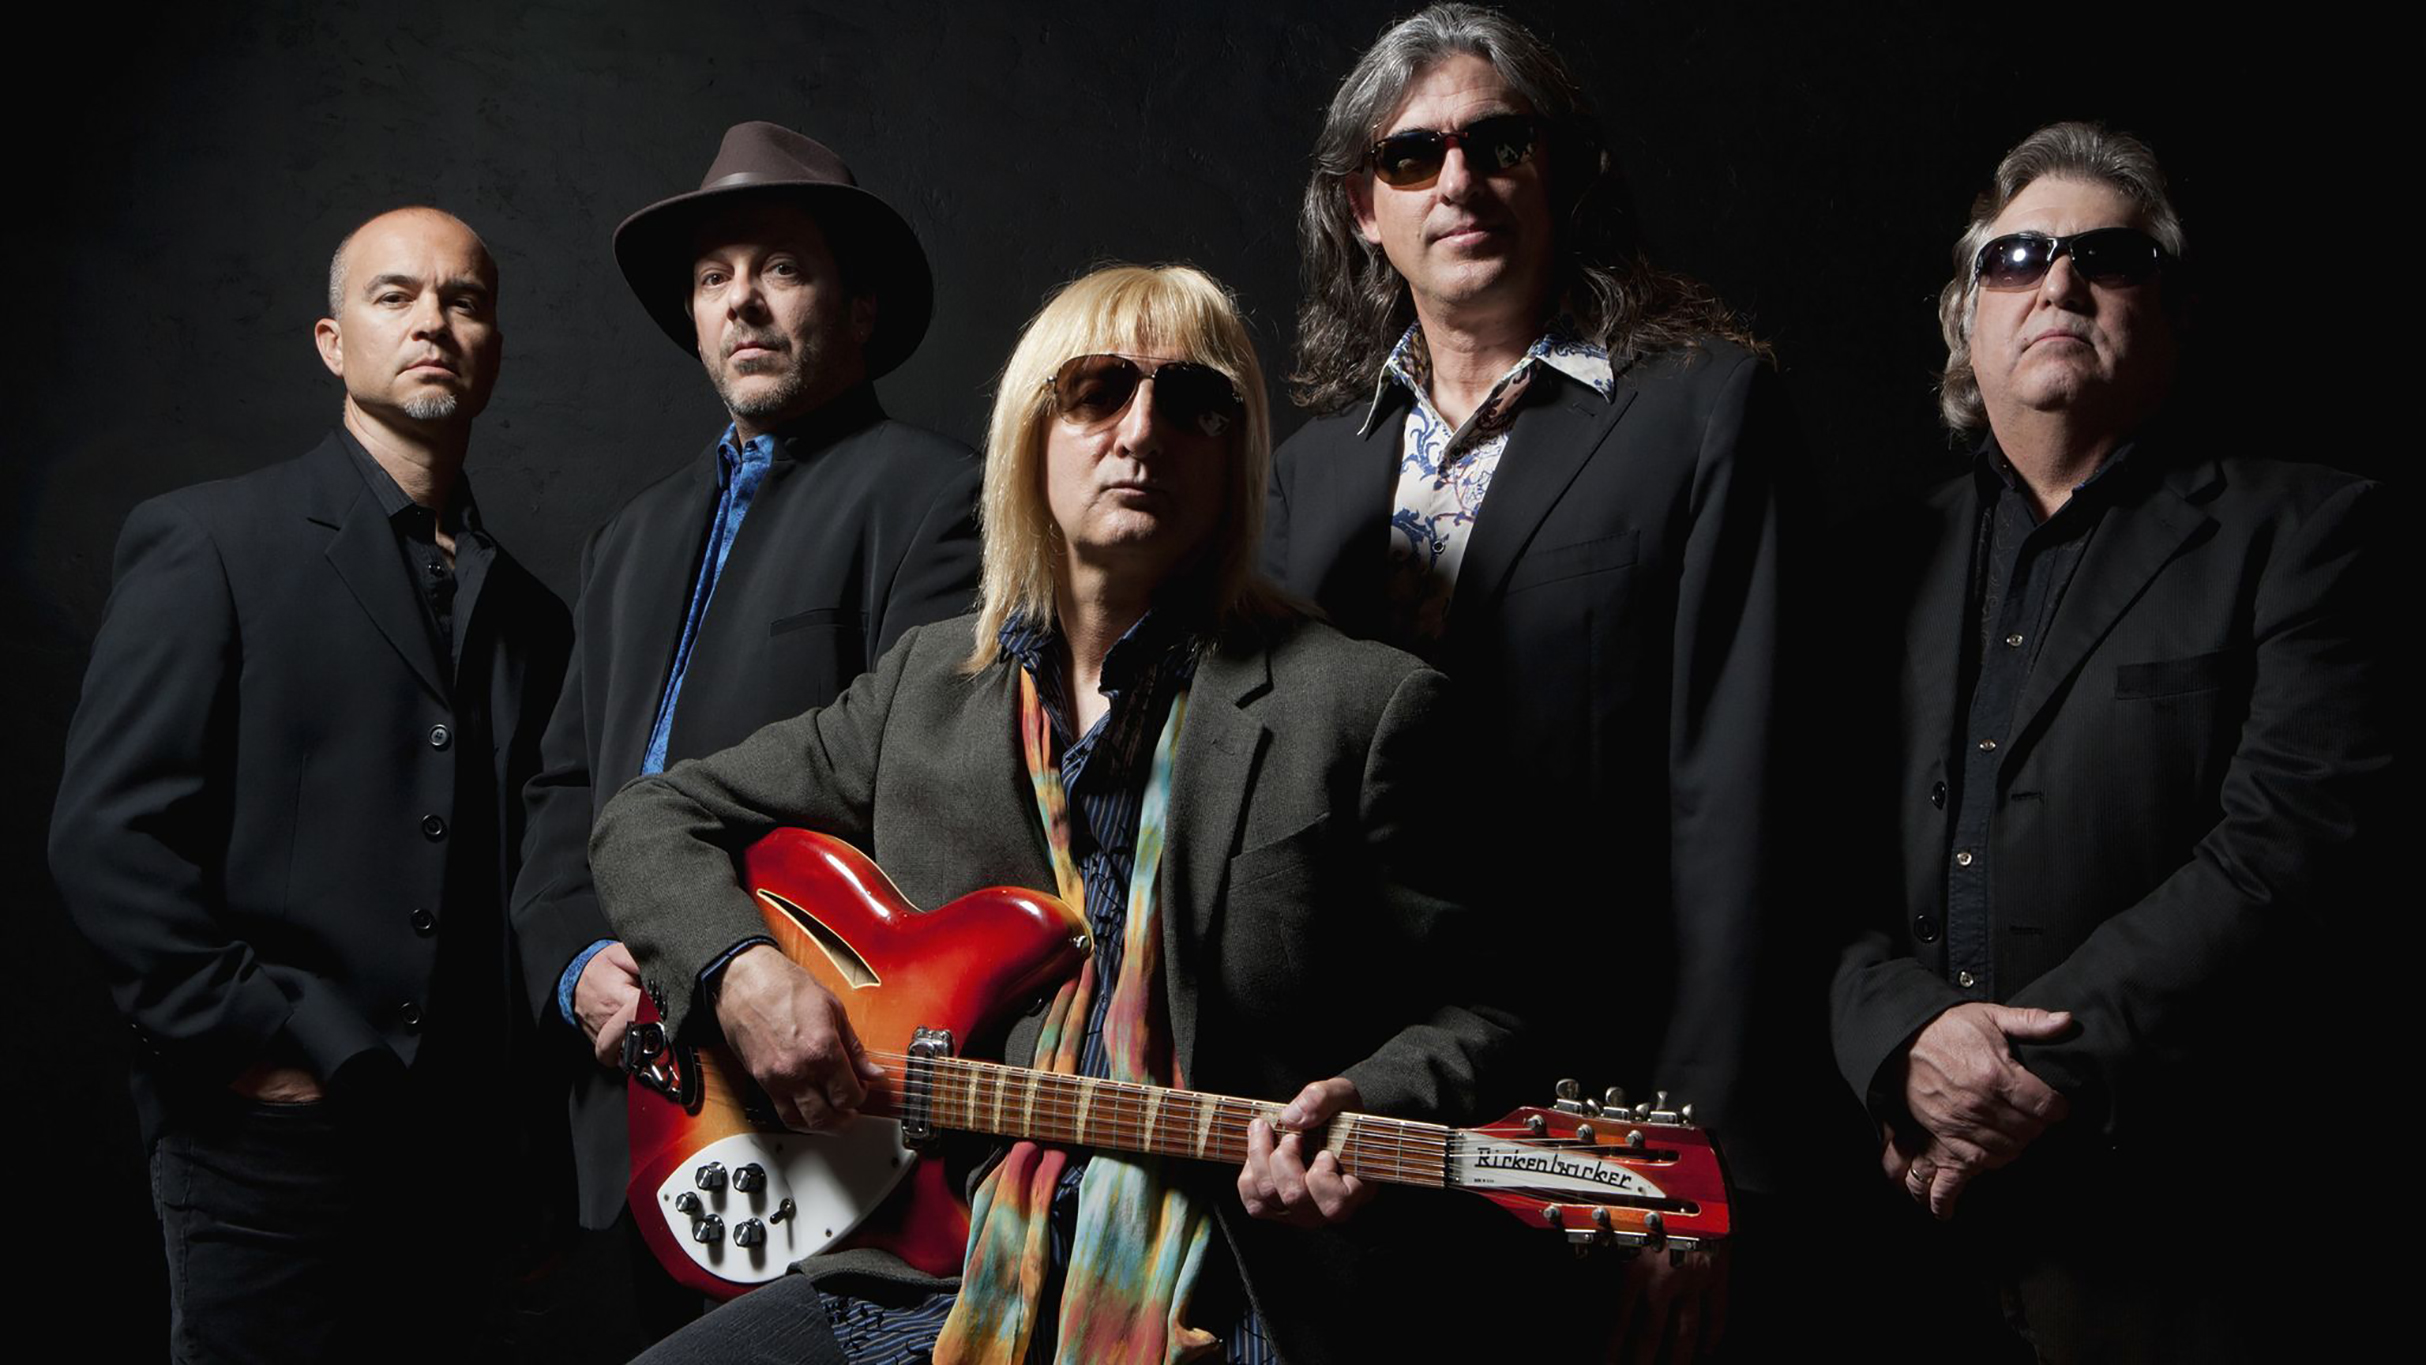 The PettyBreakers - A Tribute to Tom Petty & The Heartbreakers